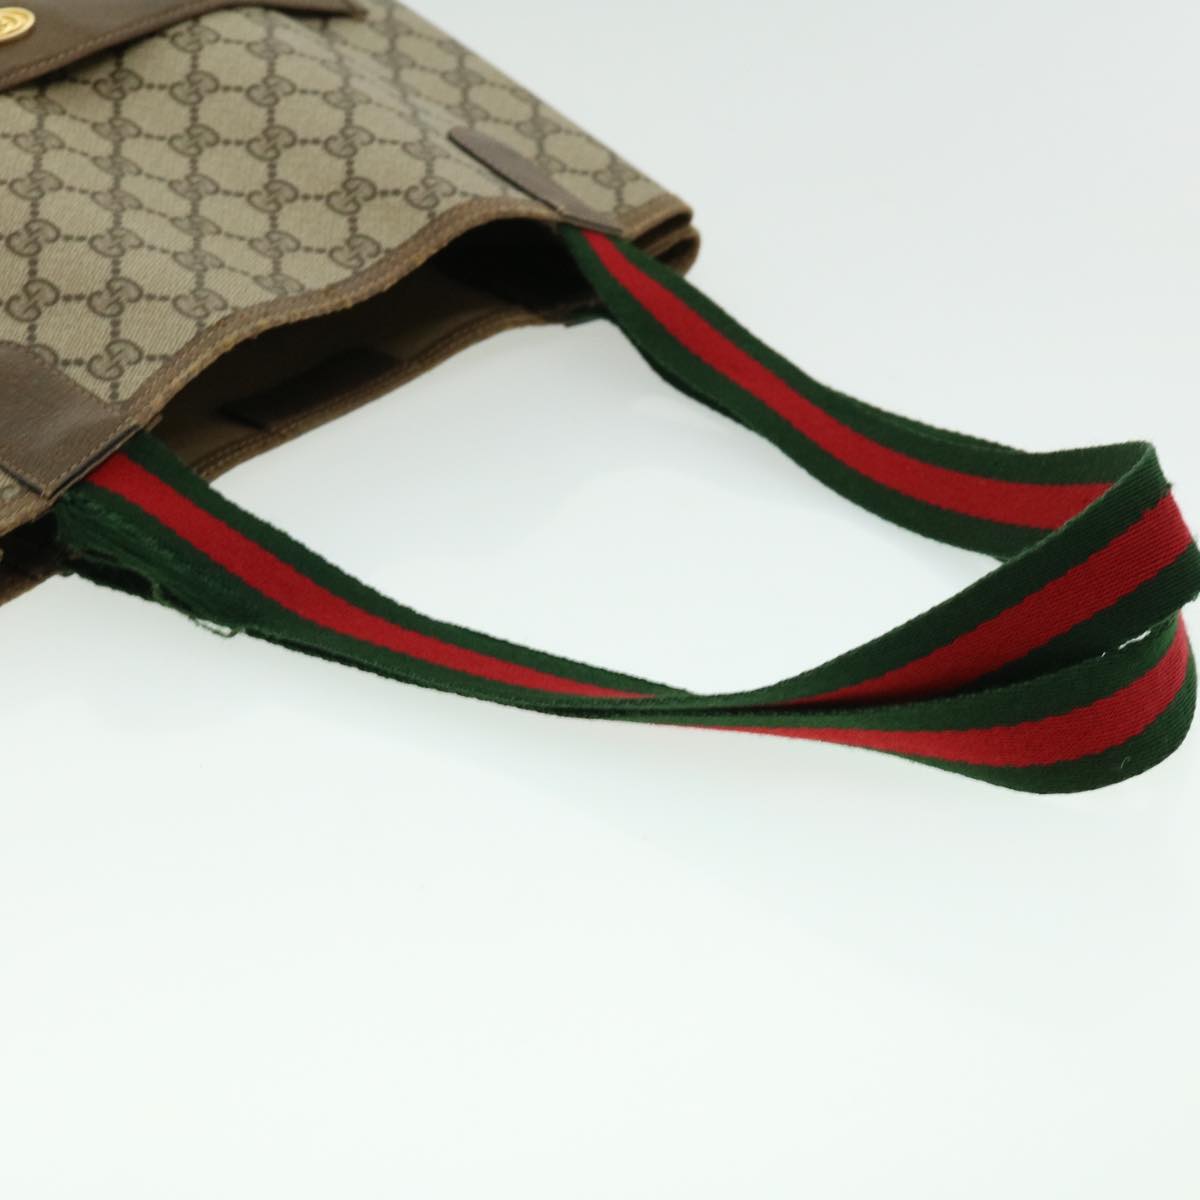 GUCCI GG Canvas Web Sherry Line Tote Bag Beige Red Green 3902003 Auth rd2376